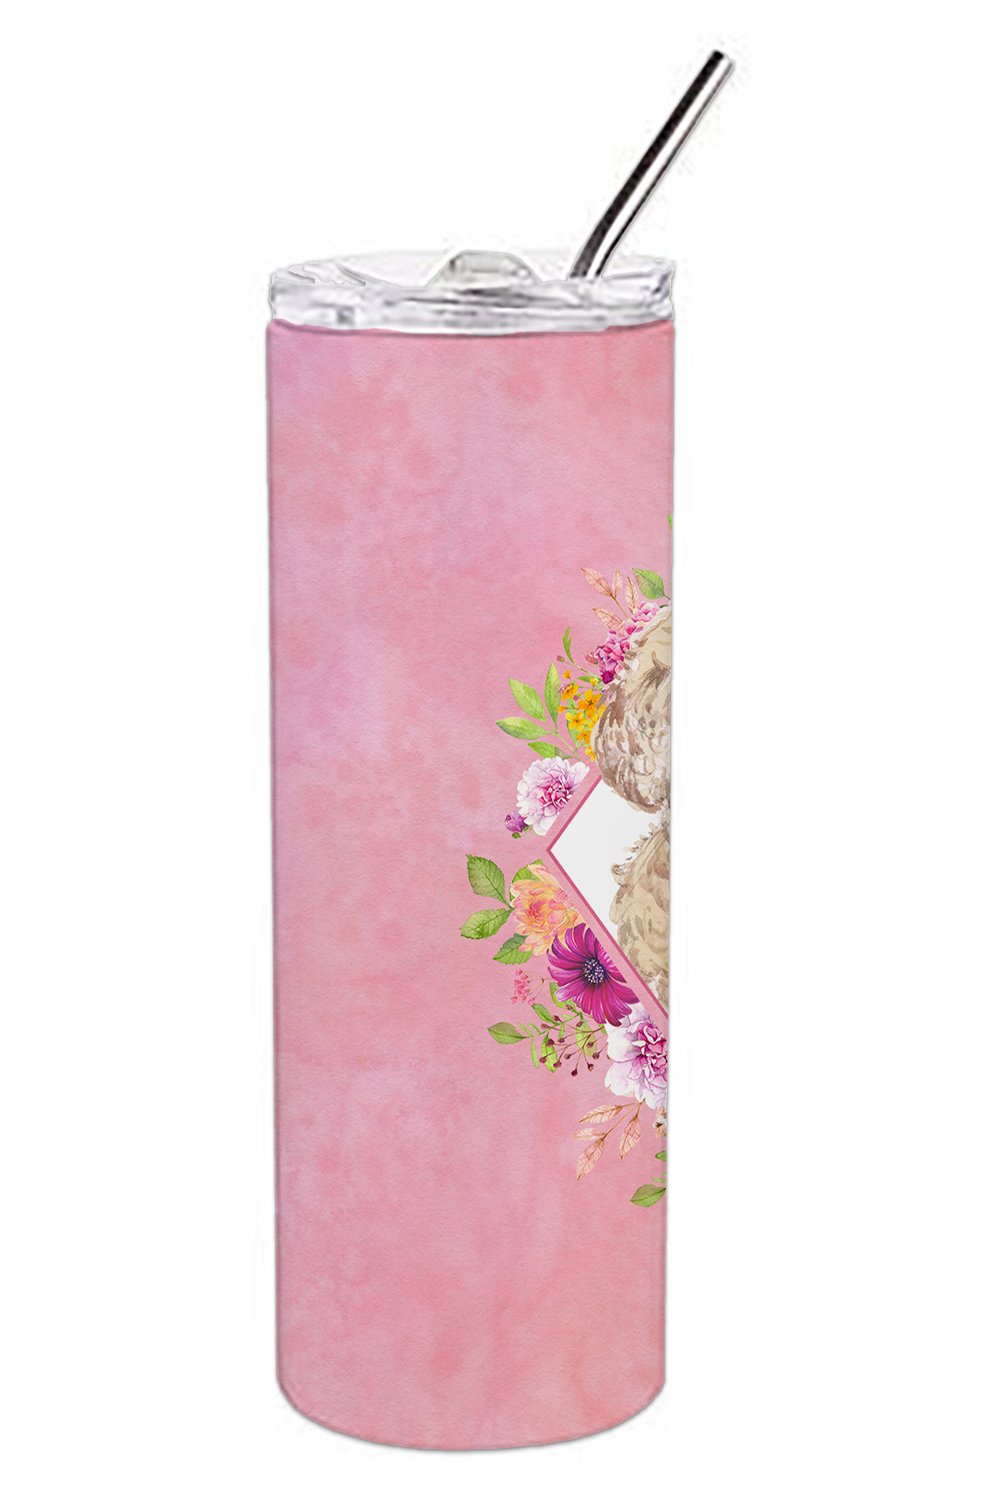 Champagne Cockapoo Pink Flowers Double Walled Stainless Steel 20 oz Skinny Tumbler CK4246TBL20 by Caroline's Treasures